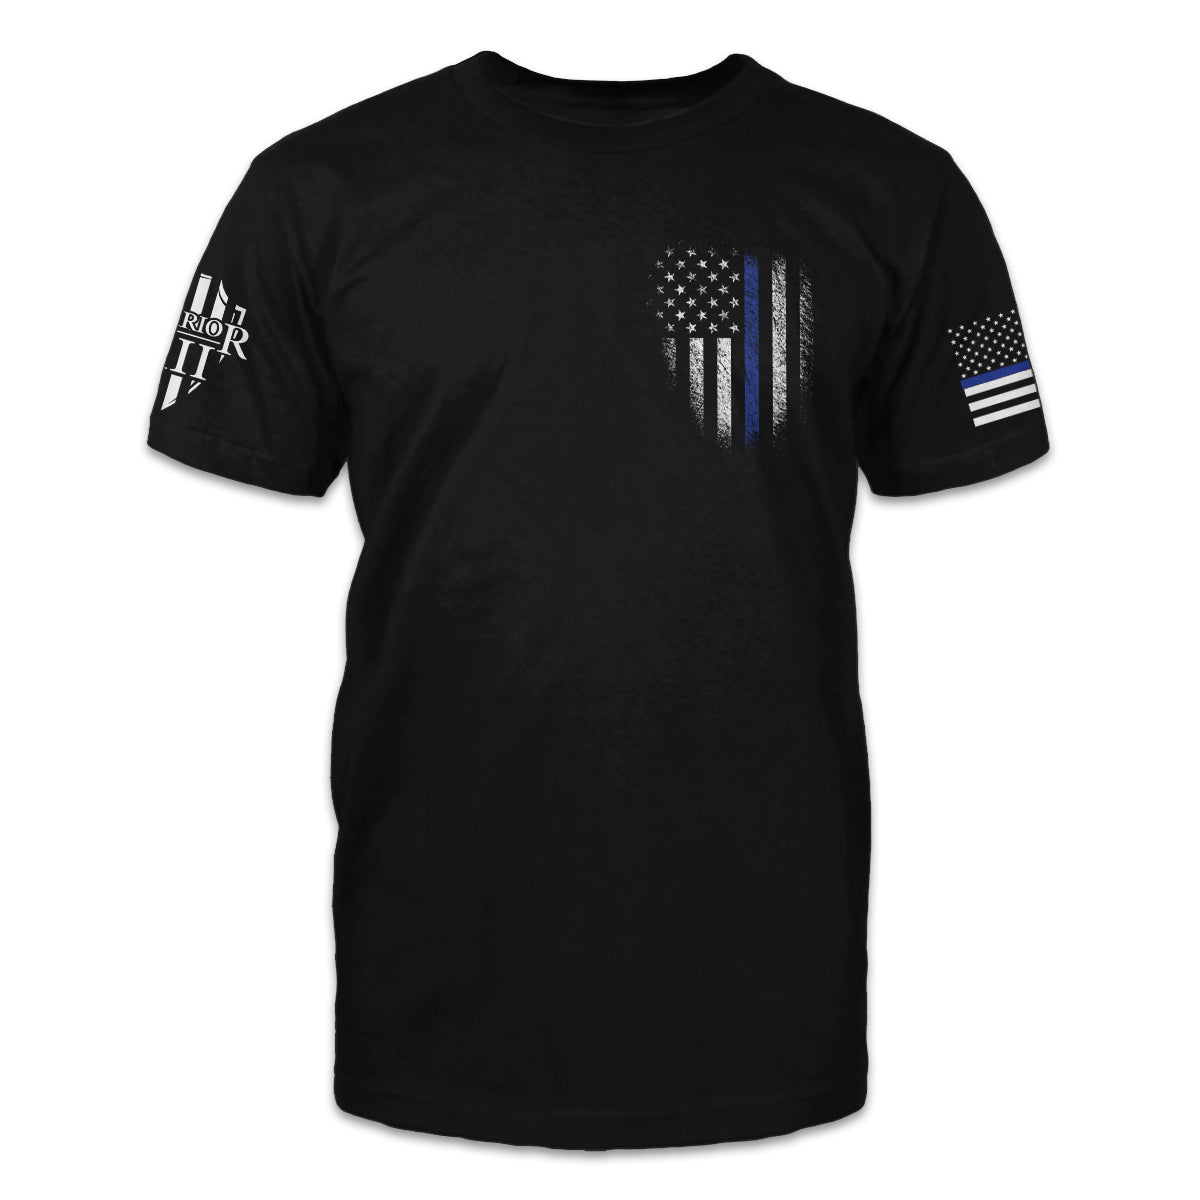 A black t-shirt with a darkened USA flag with a thin blue line printed on the front of the shirt.